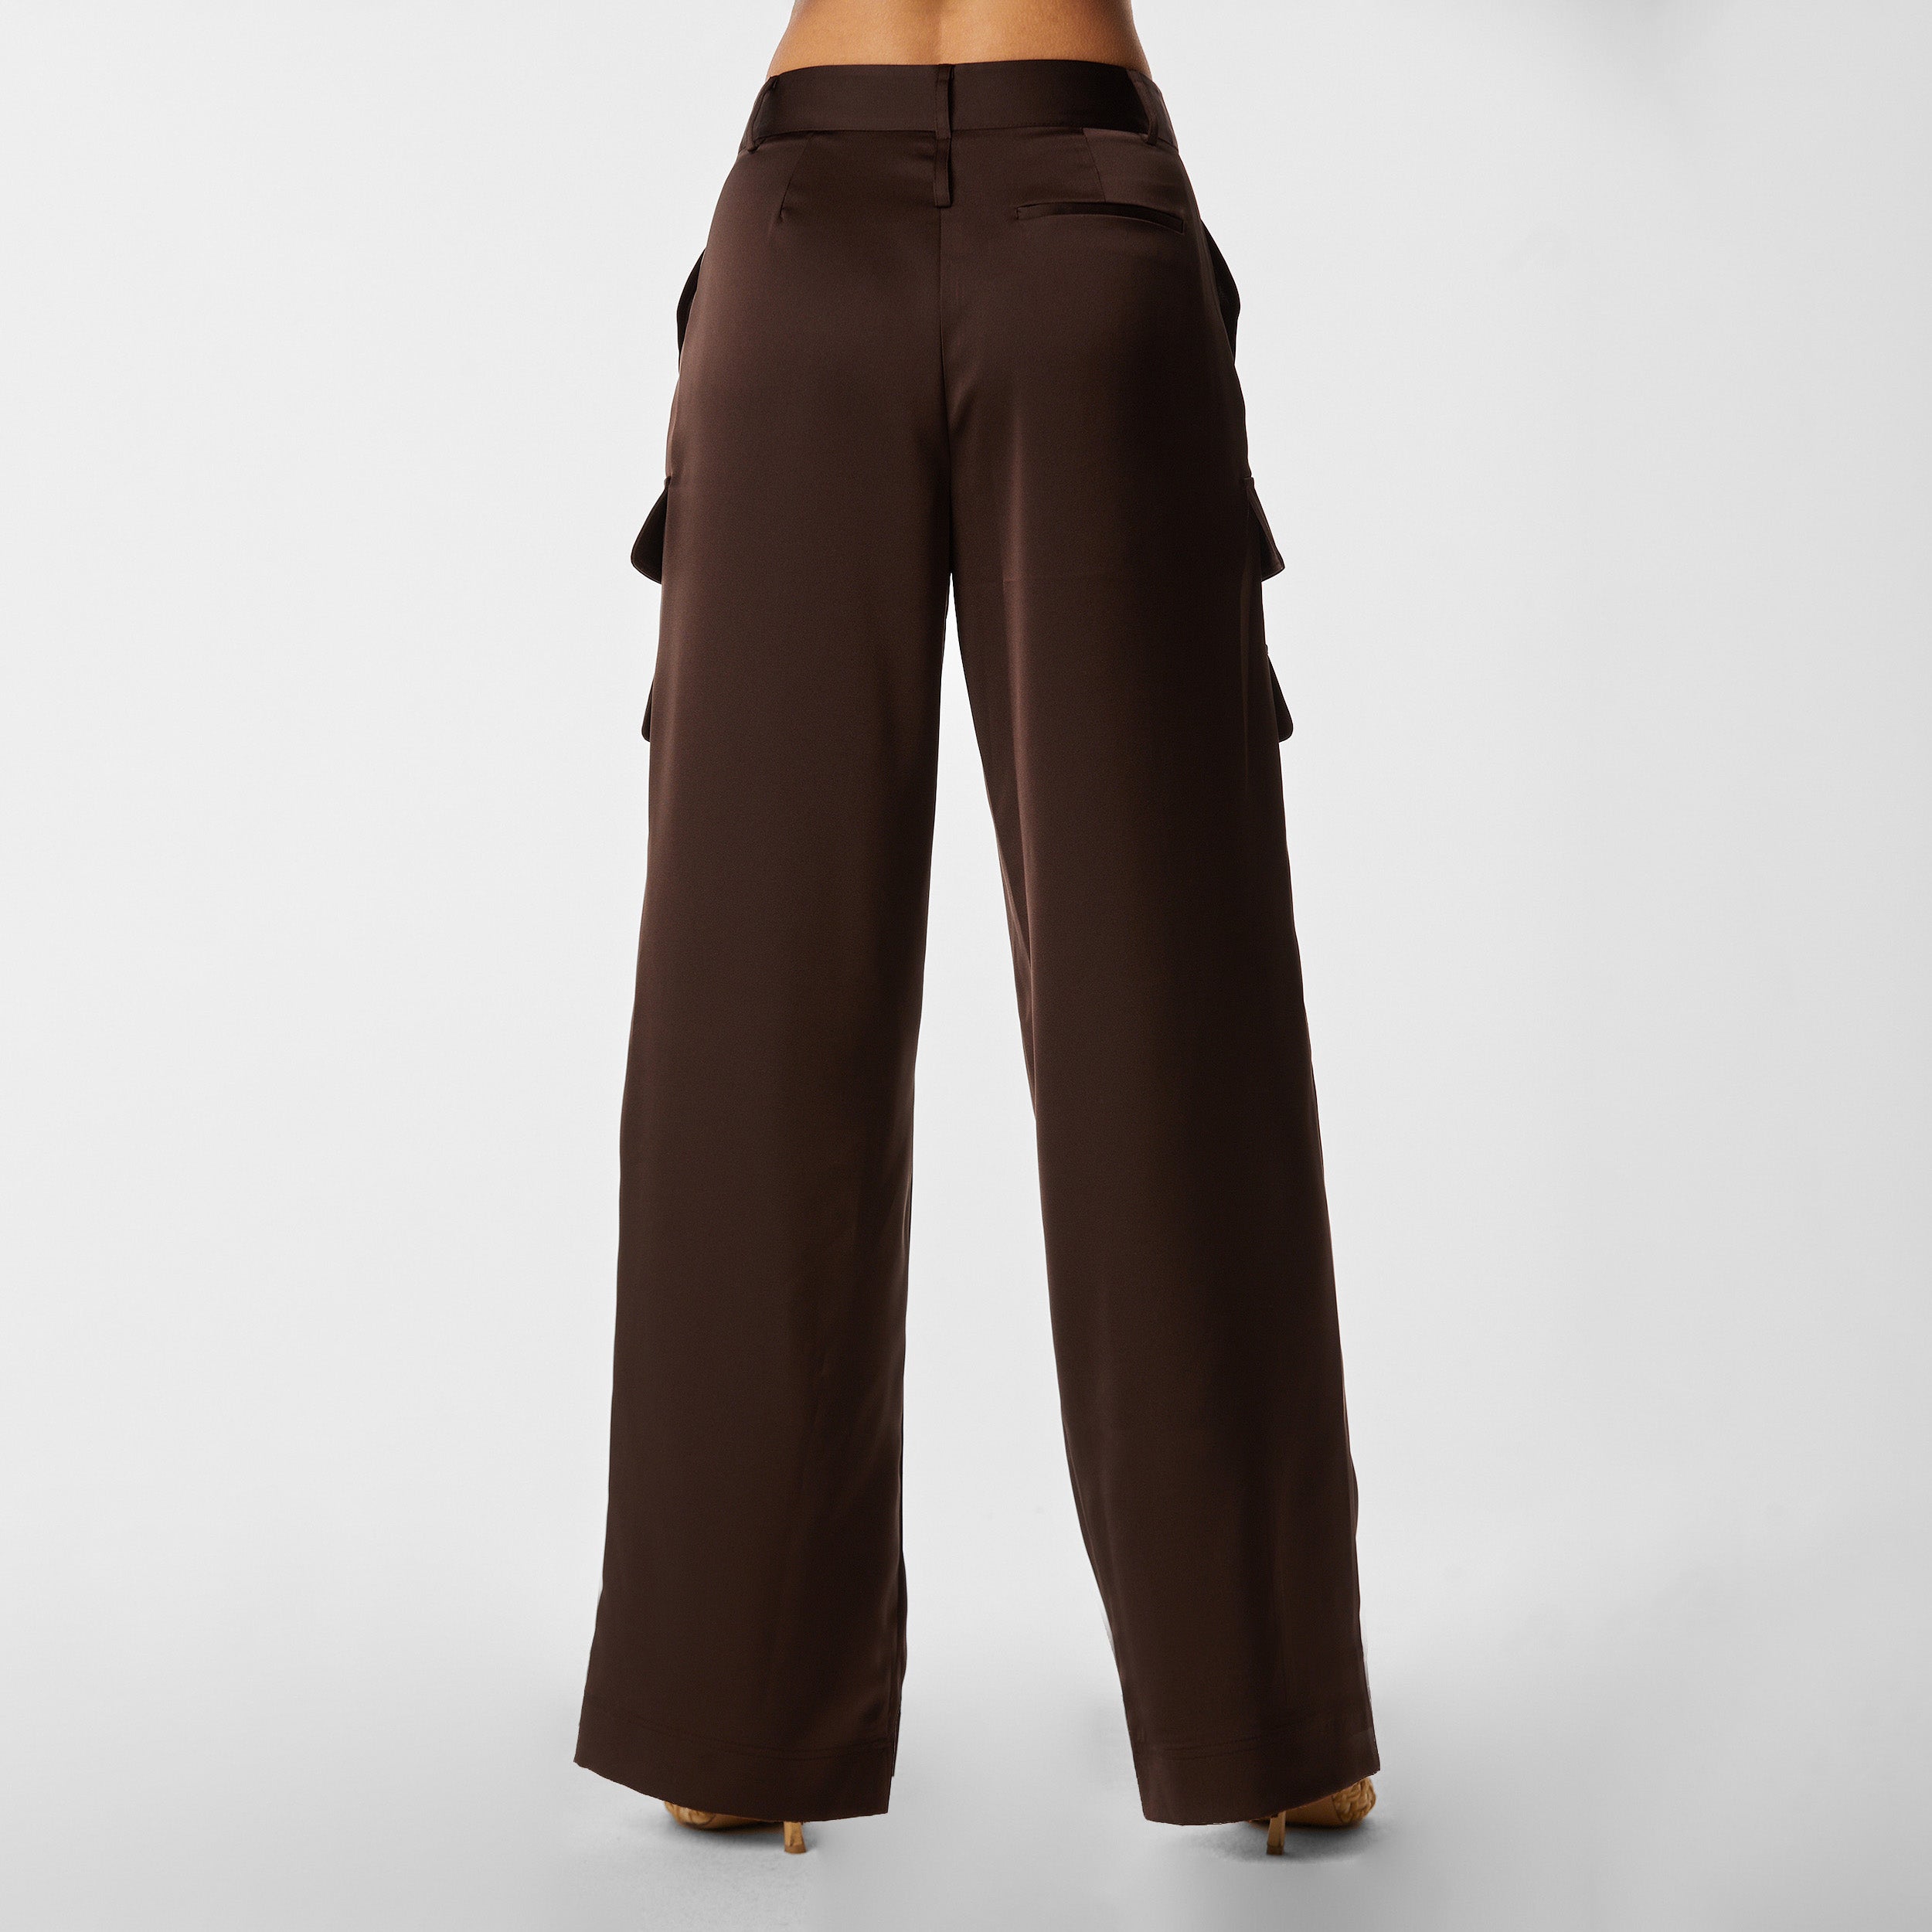 Rear view of woman wearing Brown Satin Milan Pant features Mid-rise with side pockets and cargo detail. Luxurious and structured satin-like fabric. 